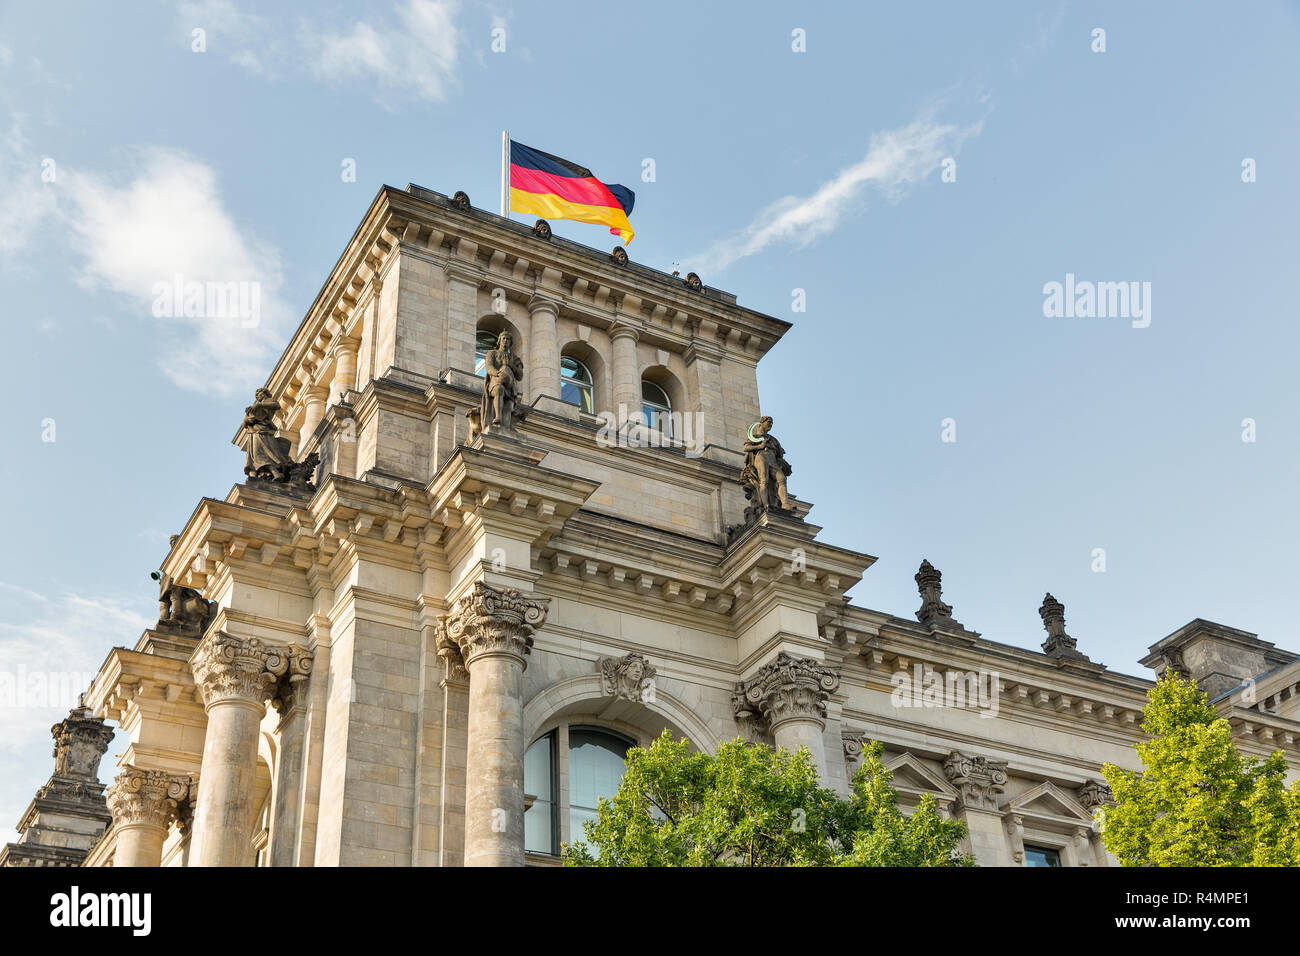 Closeup view of famous Reichstag building tower with German flag, seat of the German Parliament. Berlin Mitte district, Germany. Stock Photo